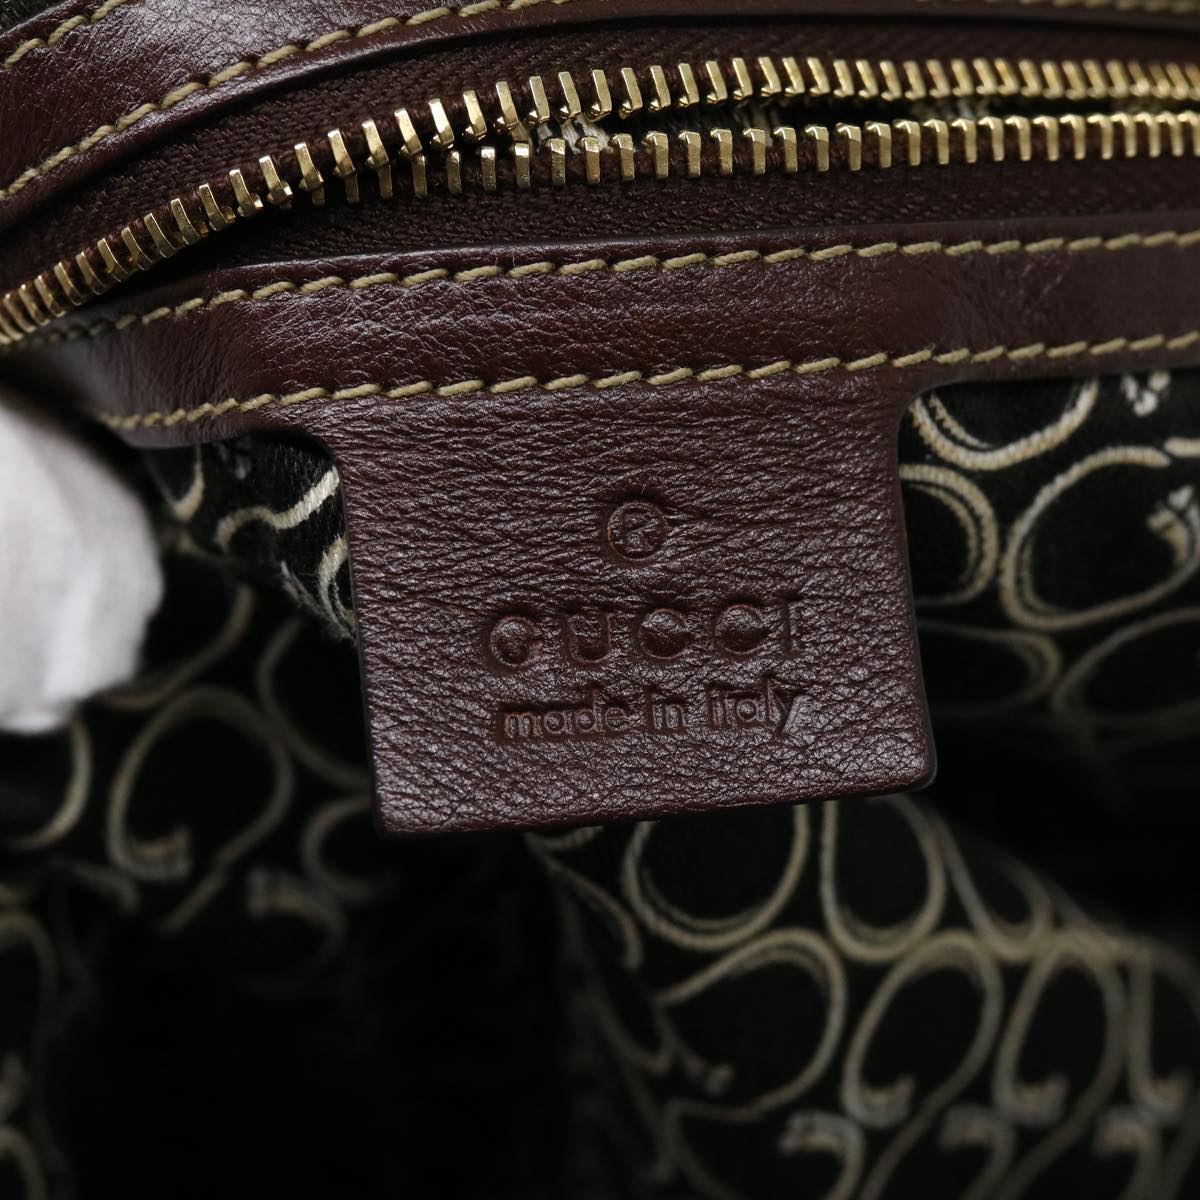 GUCCI Shoulder Bag Leather Brown 189892002058 Auth im373